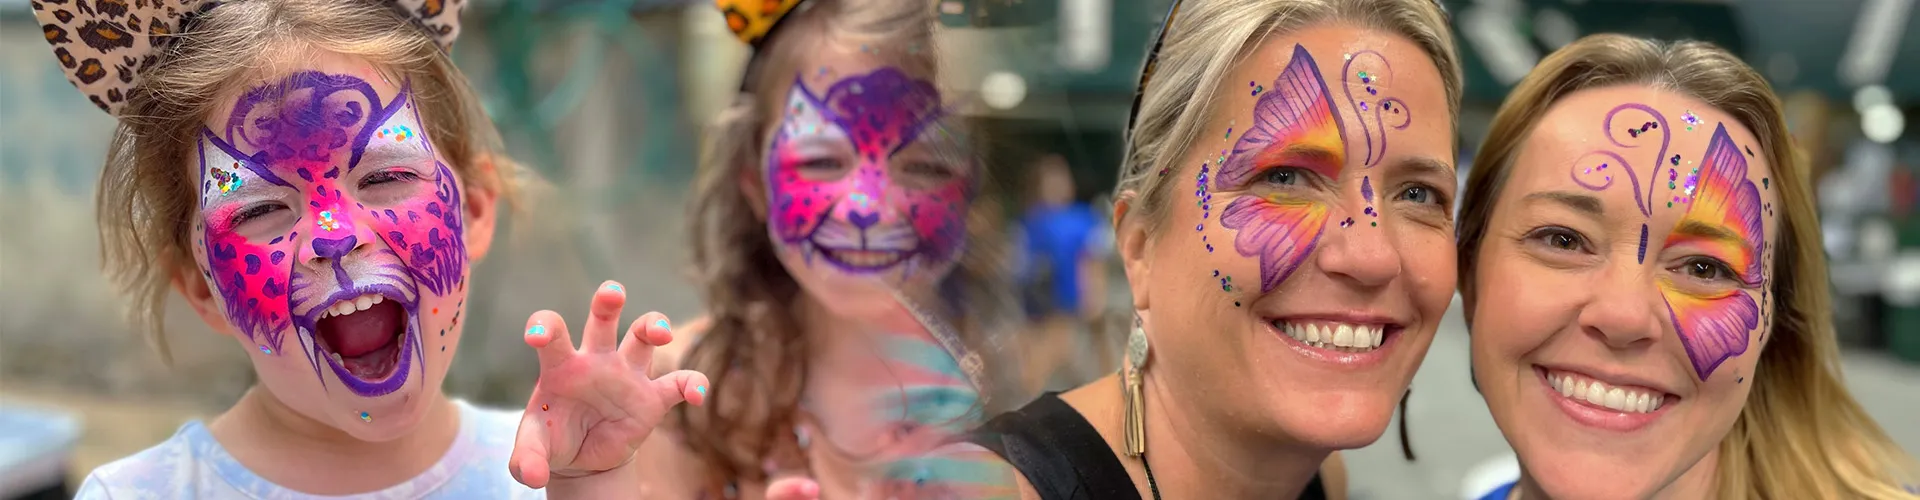 A kid and 2 women with facepainting